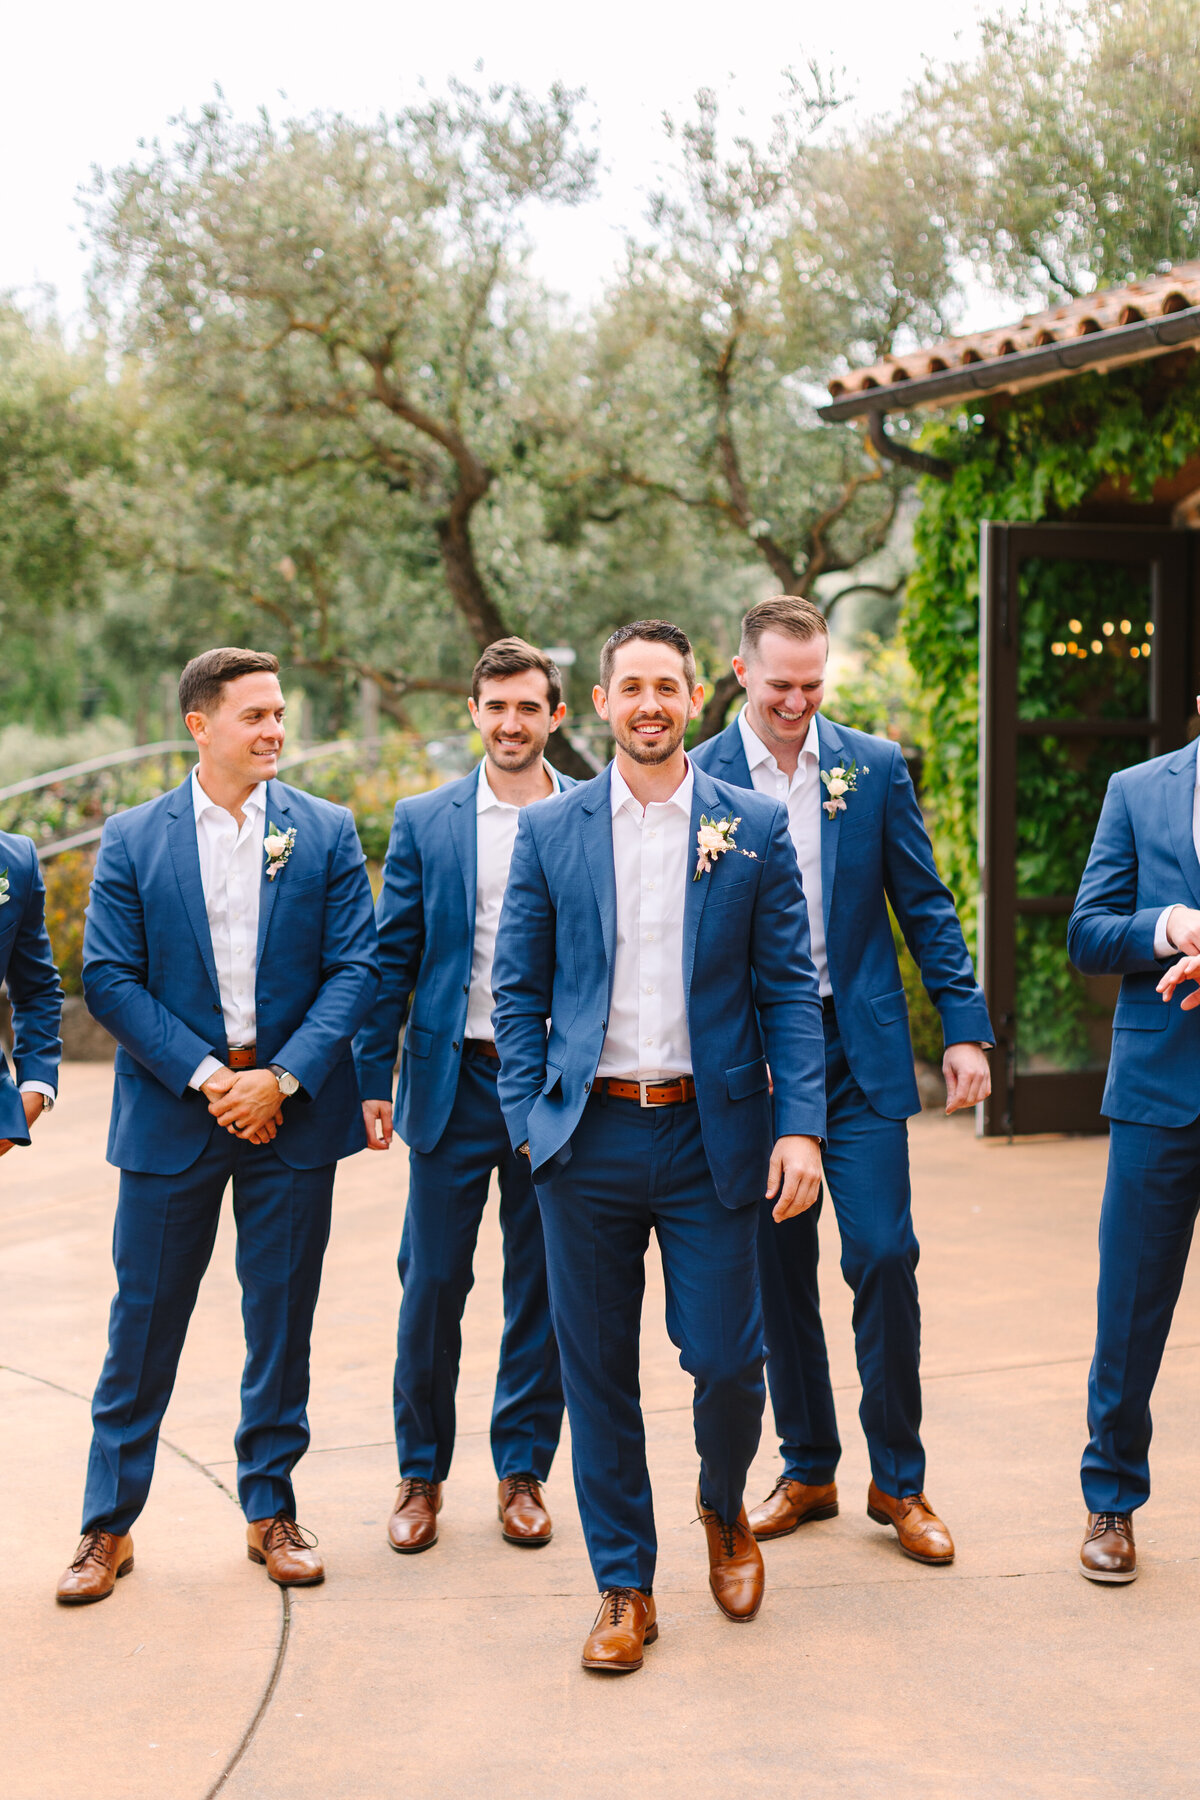 groom with groomsmen casually smiling in front of sonoma county vineyard.